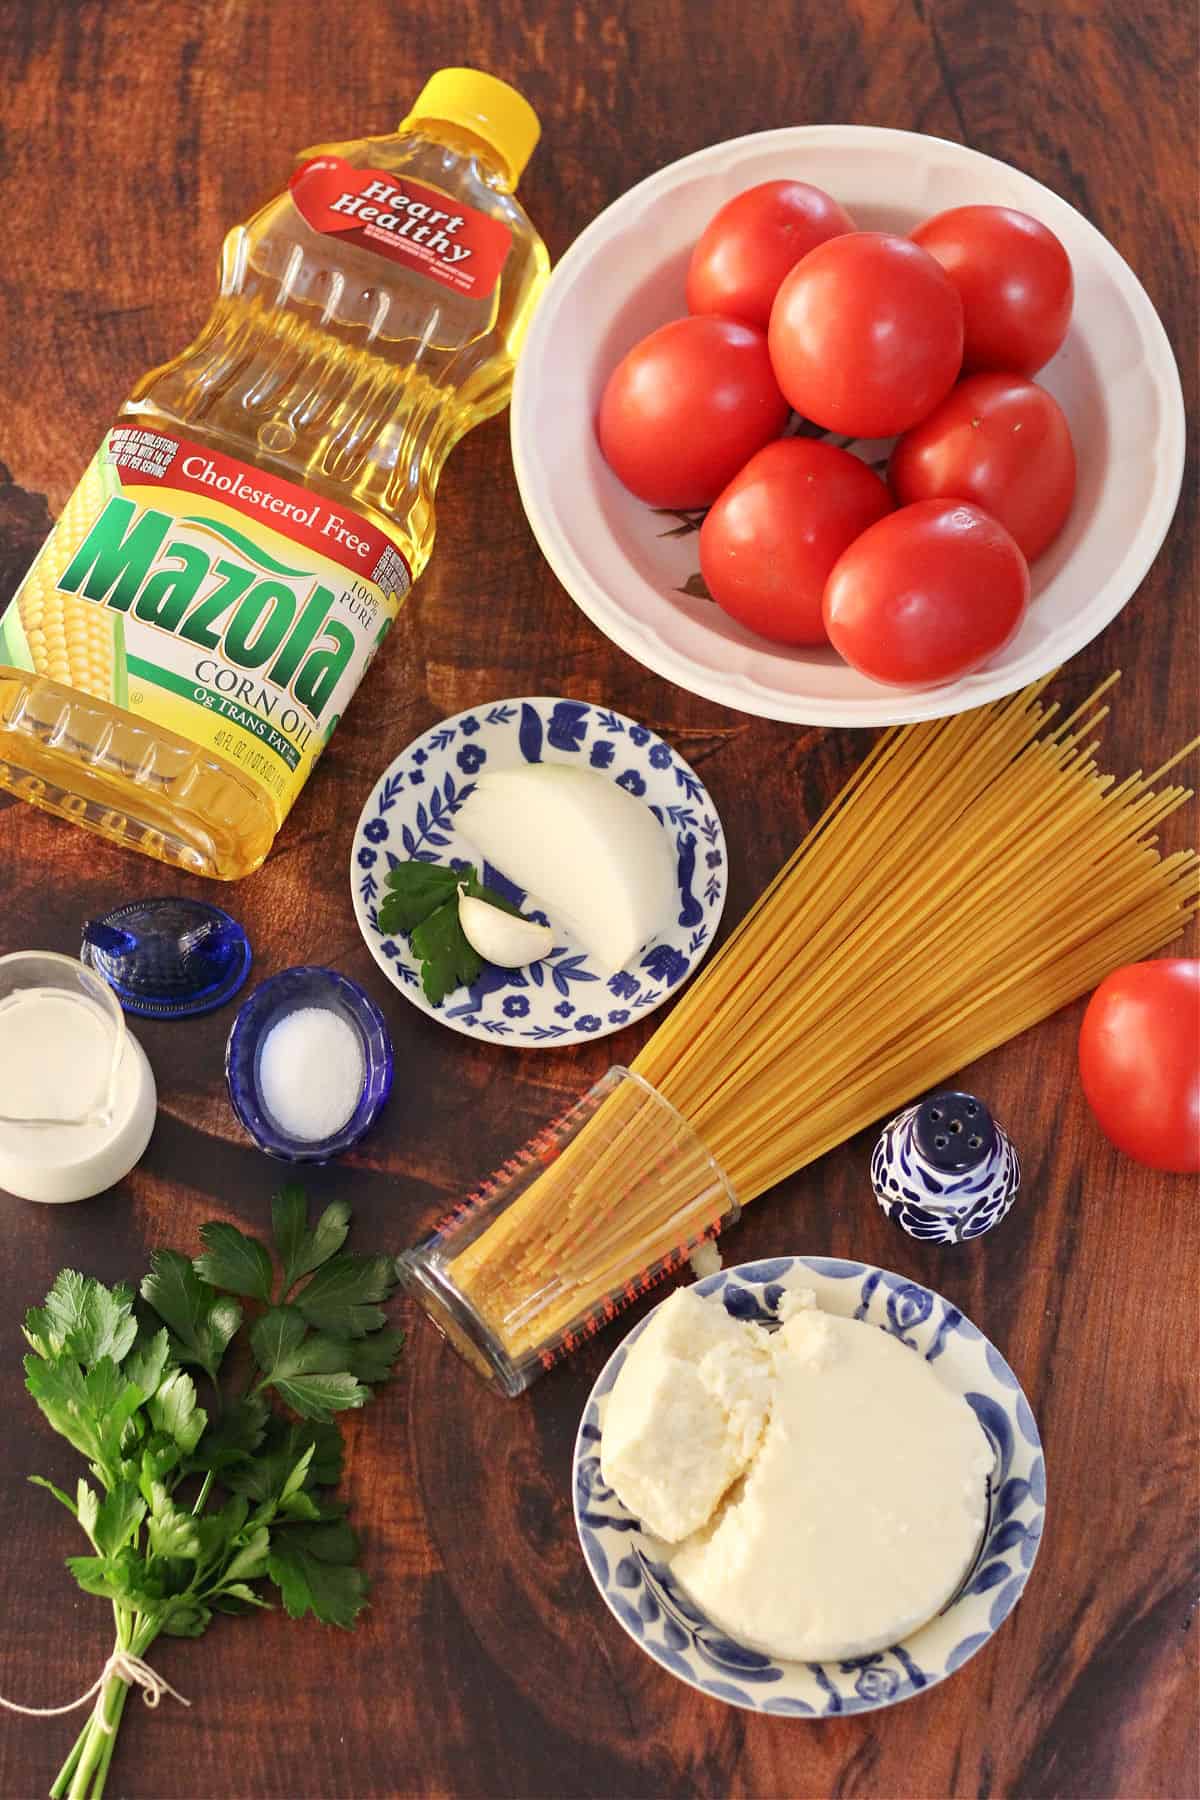 Easy Mexican spaghetti with homemade tomato sauce, this recipe use ingredients many of you maybe already have in your kitchen! Simply Delicious!